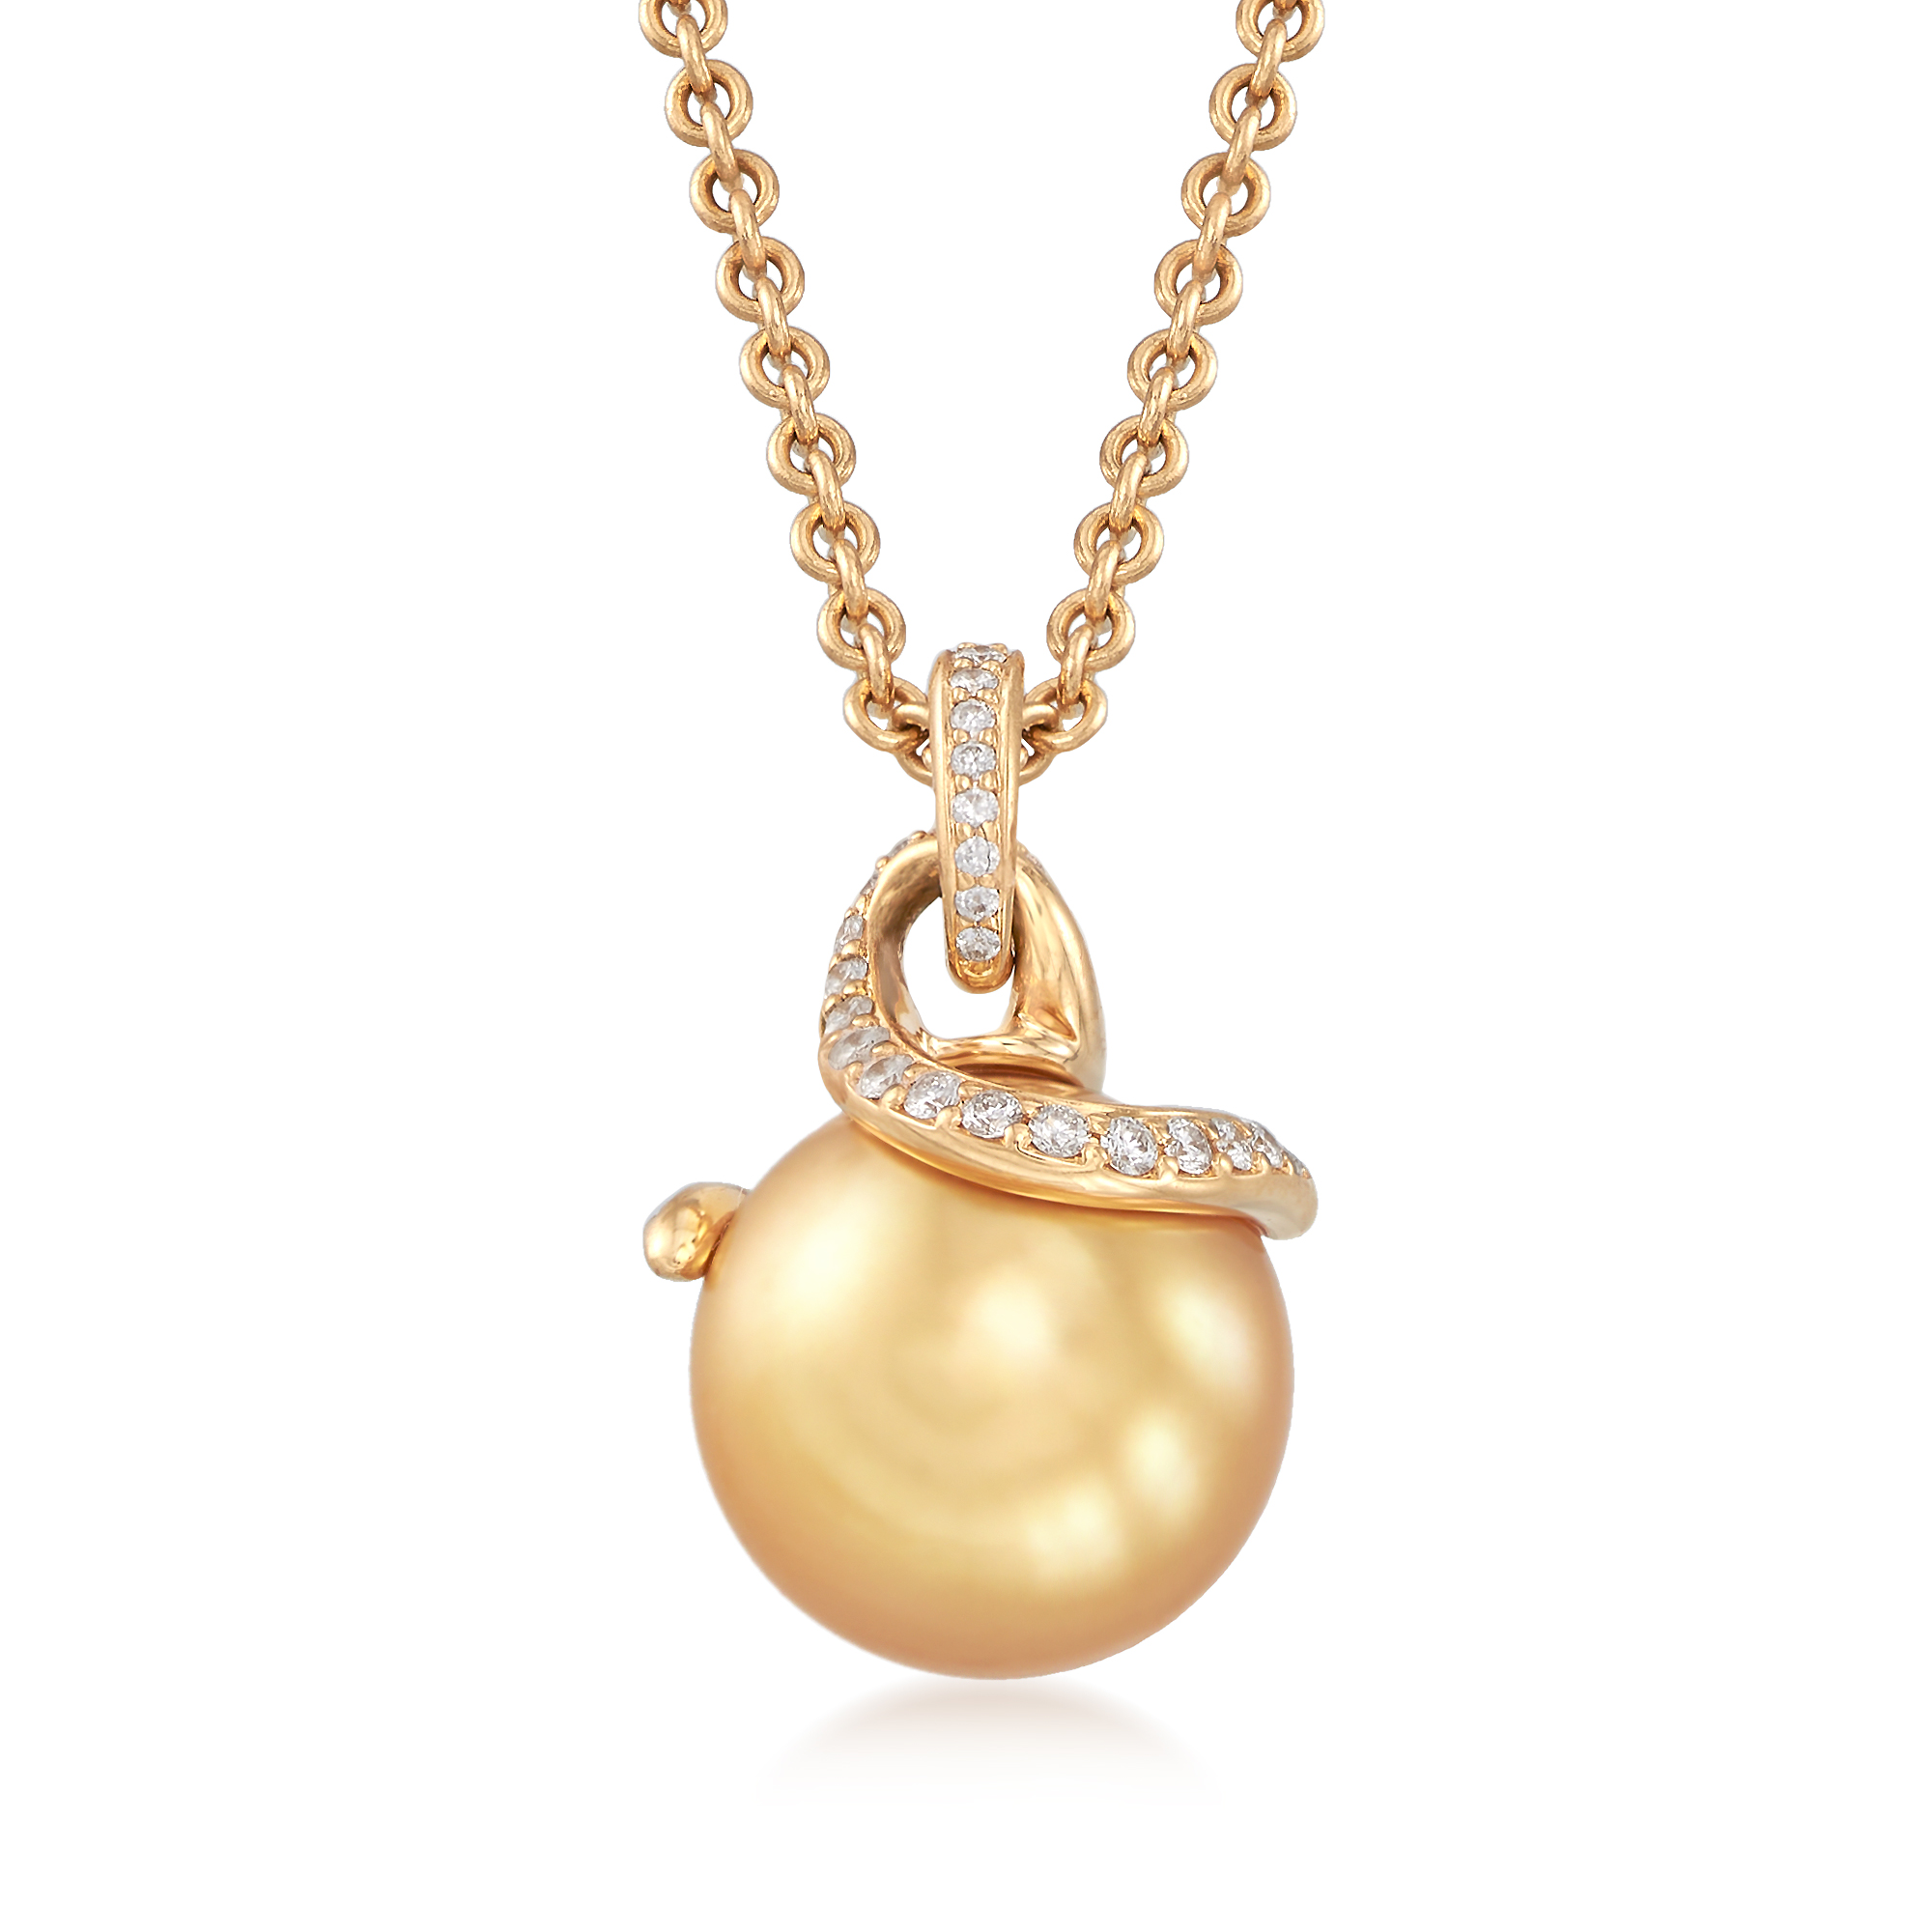 Mikimoto 11mm Golden South Sea Pearl Necklace with .20 ct. t.w. 